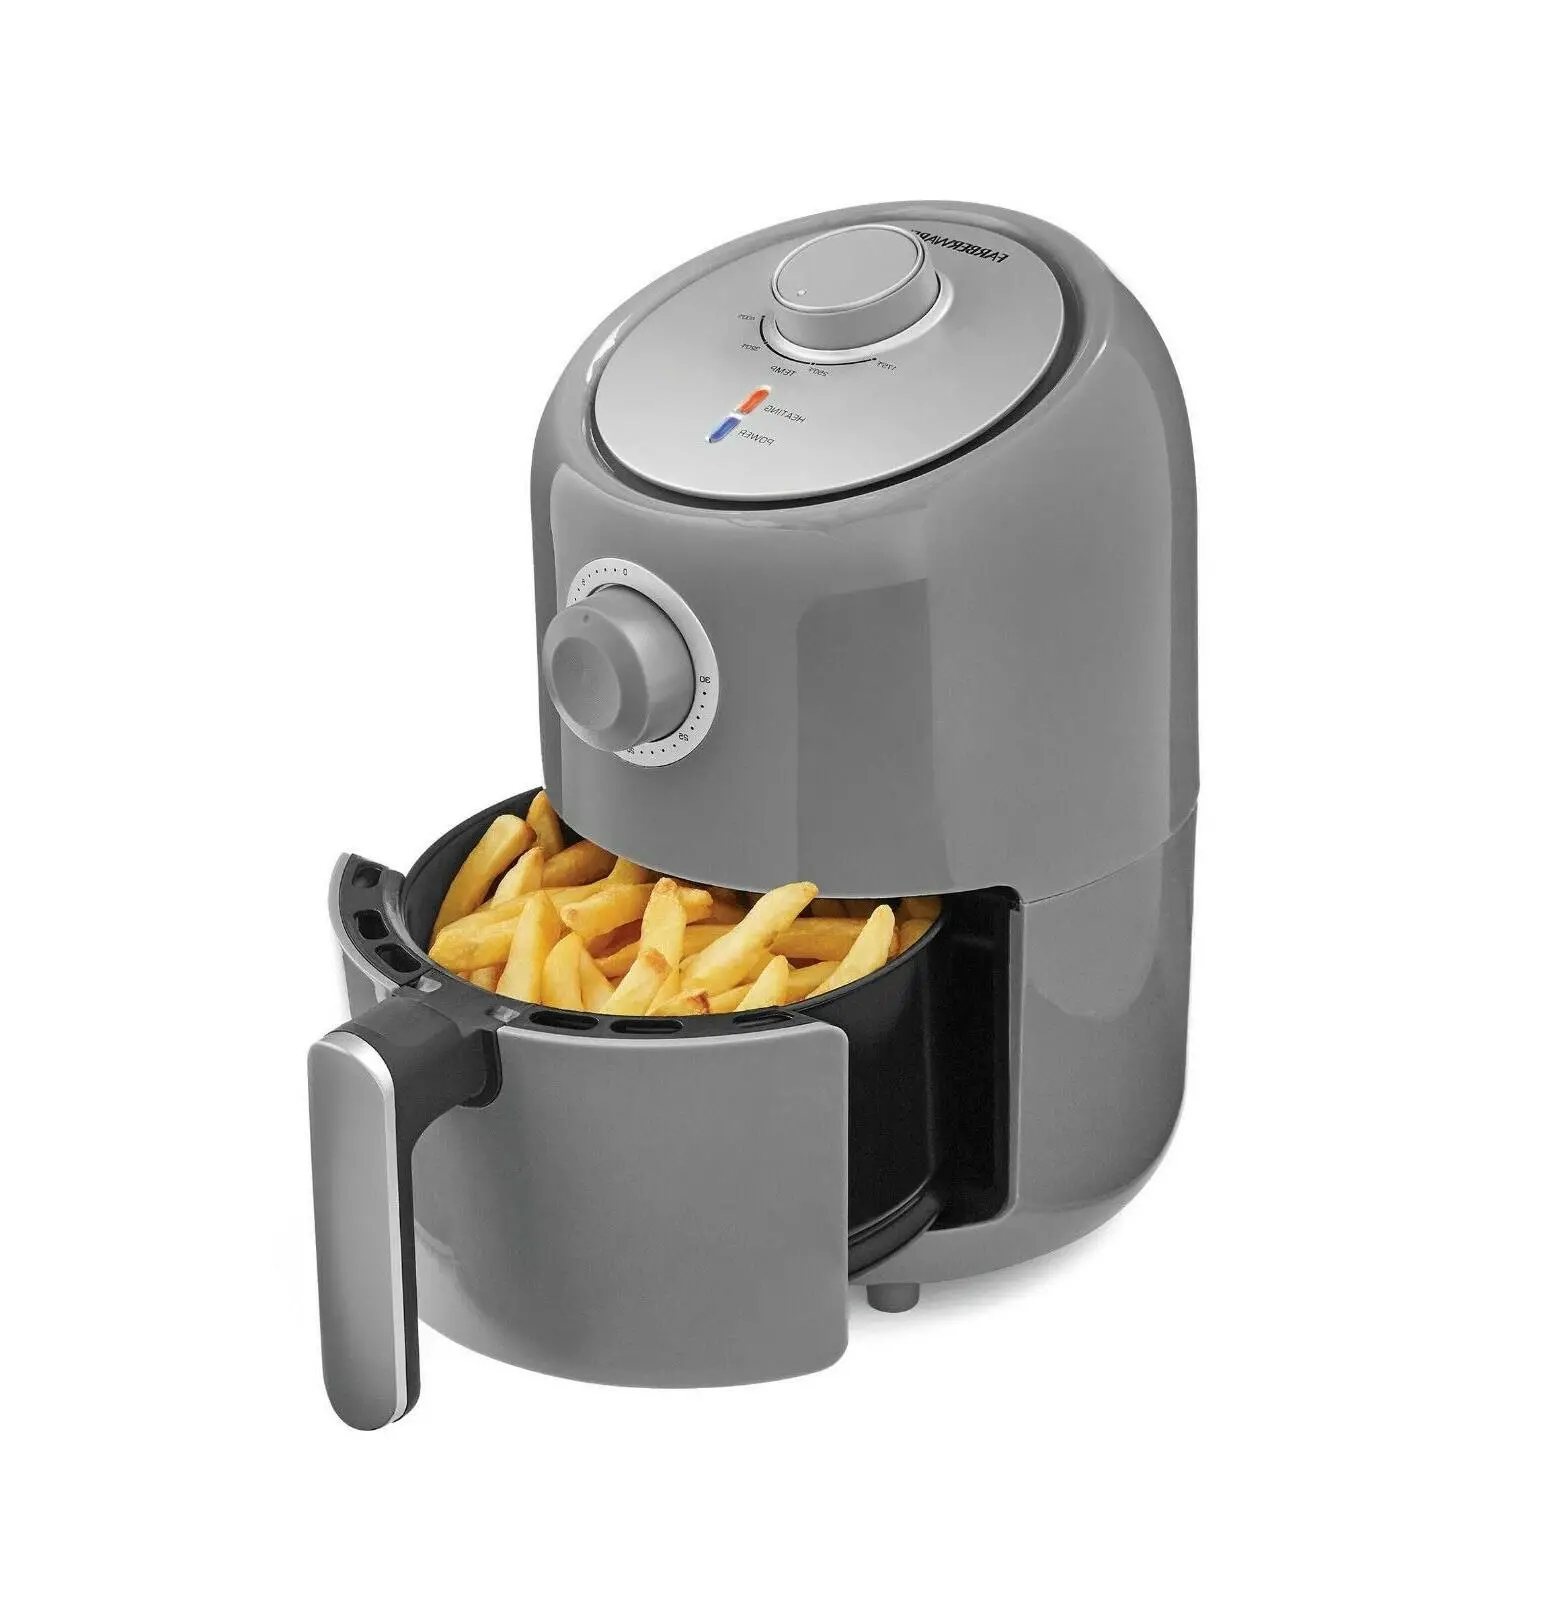 Farberware 1.9QT Air Fryer, Great for traditional French